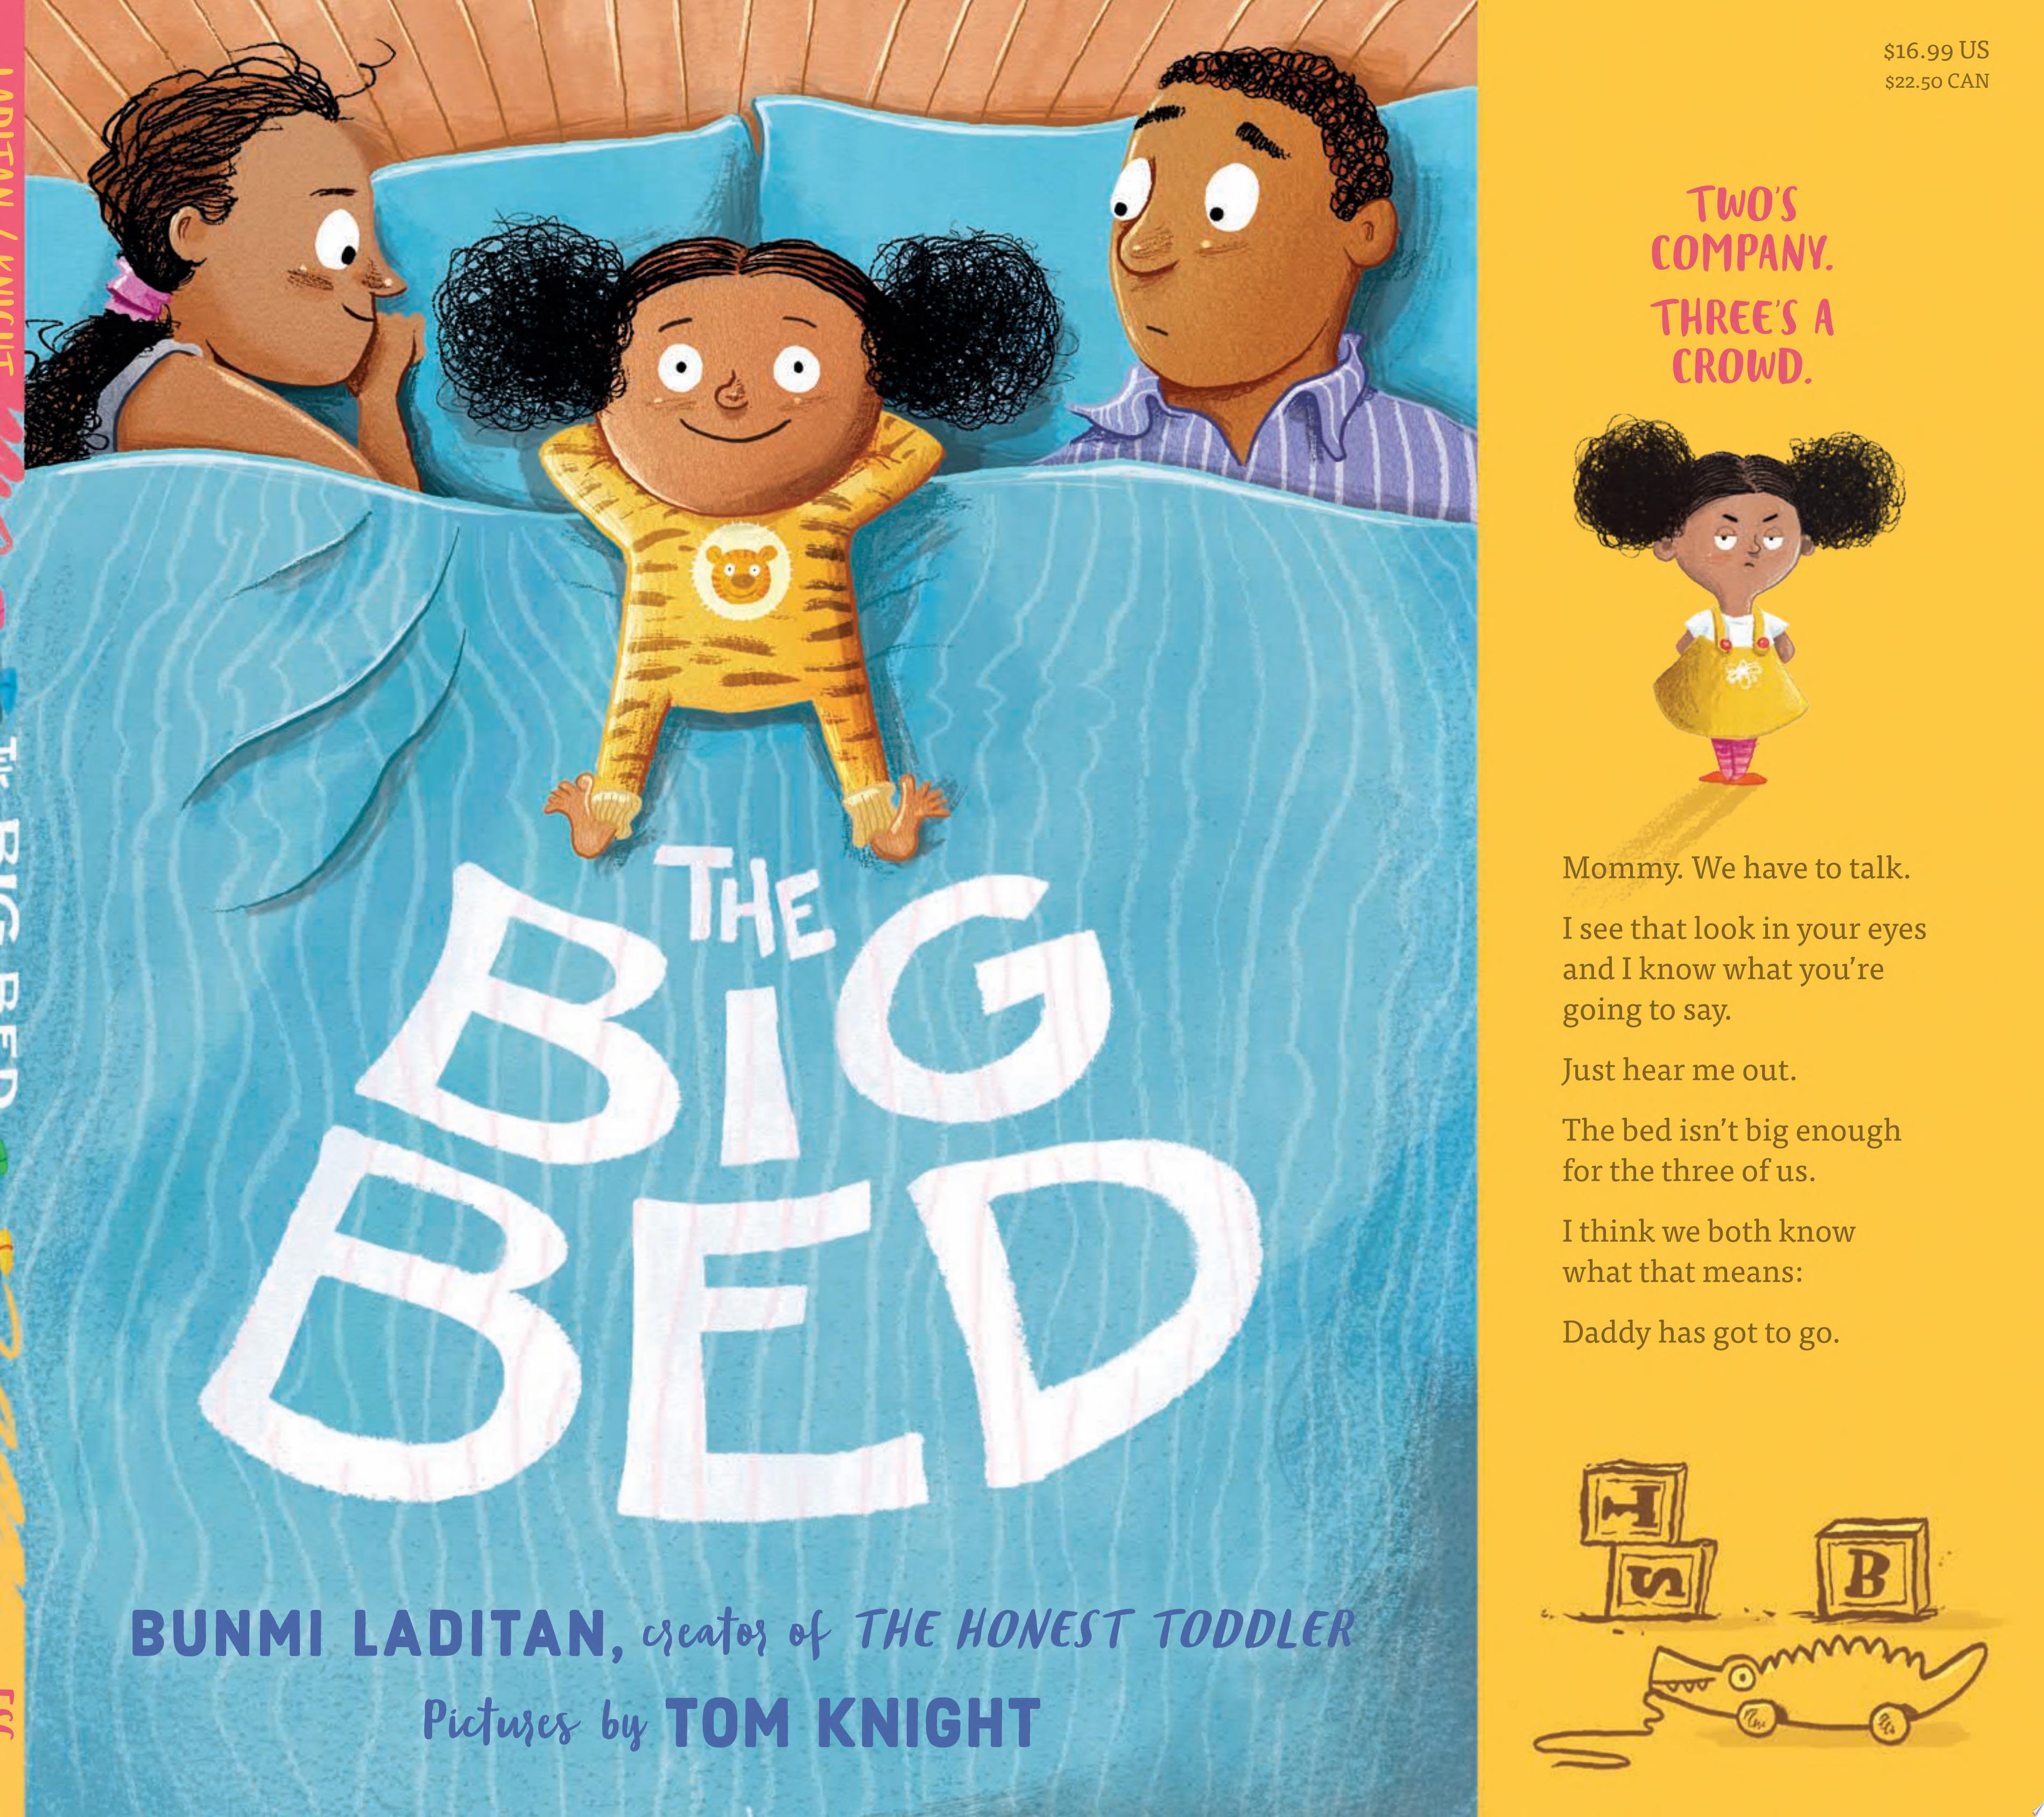 Image for "The Big Bed"